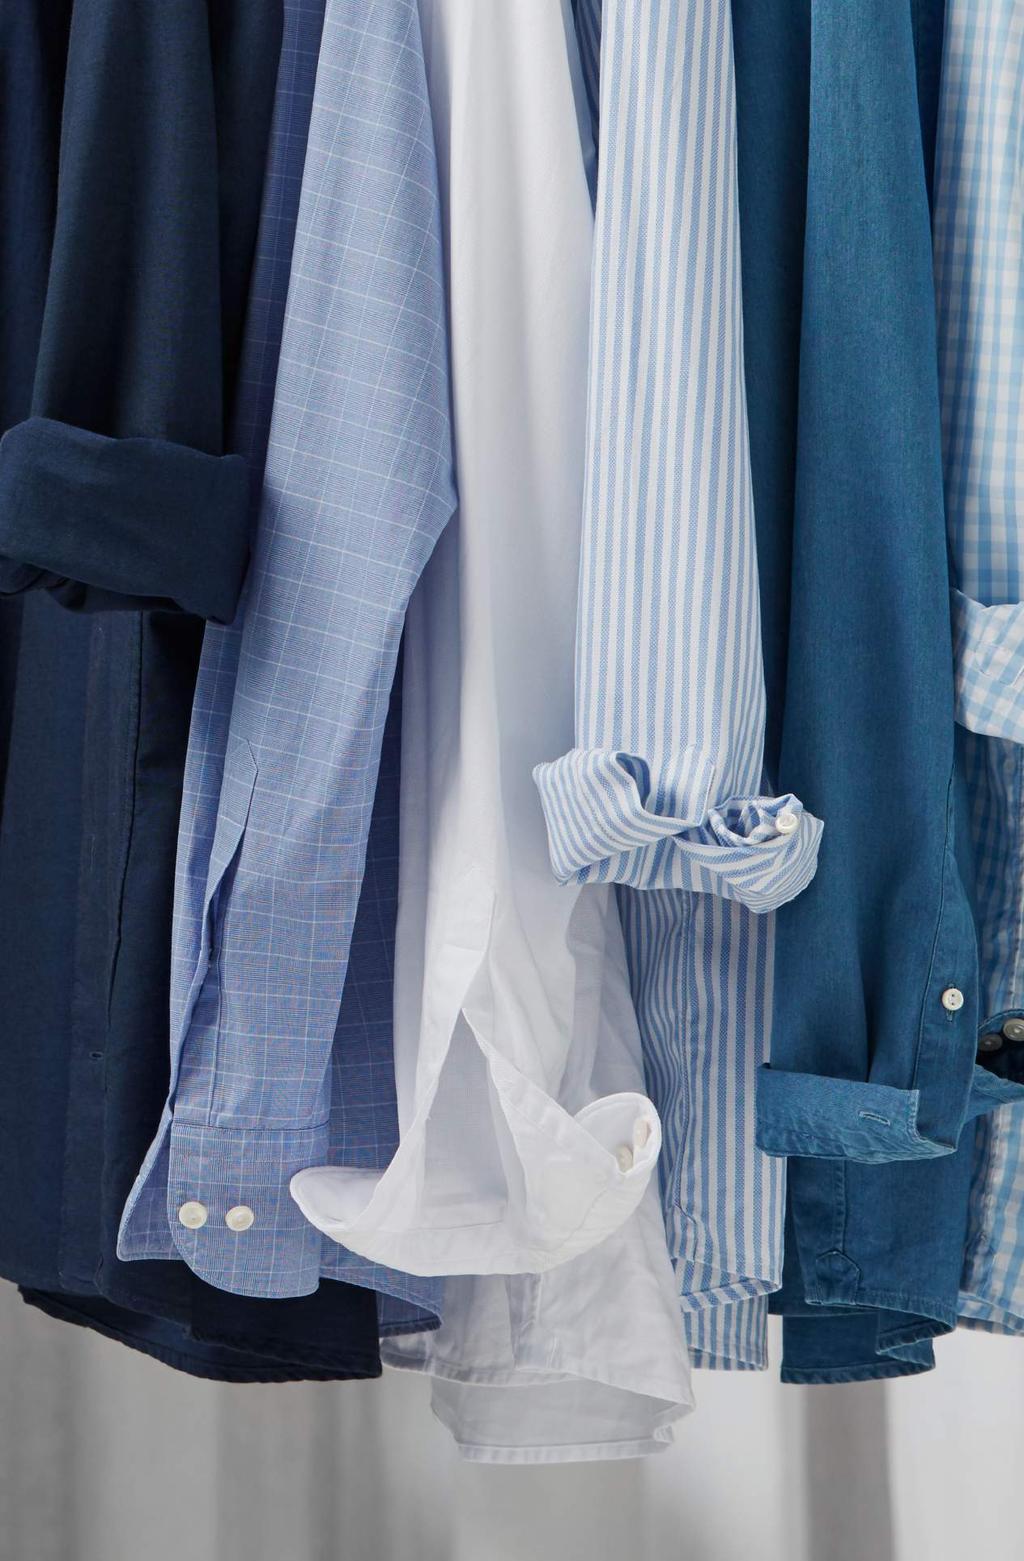 CASUAL Soft Classics When the line between business and relaxation is blurred, new standards must be set. These shirts embody a casual feel and touch, yet with uncompromising attention to detail.